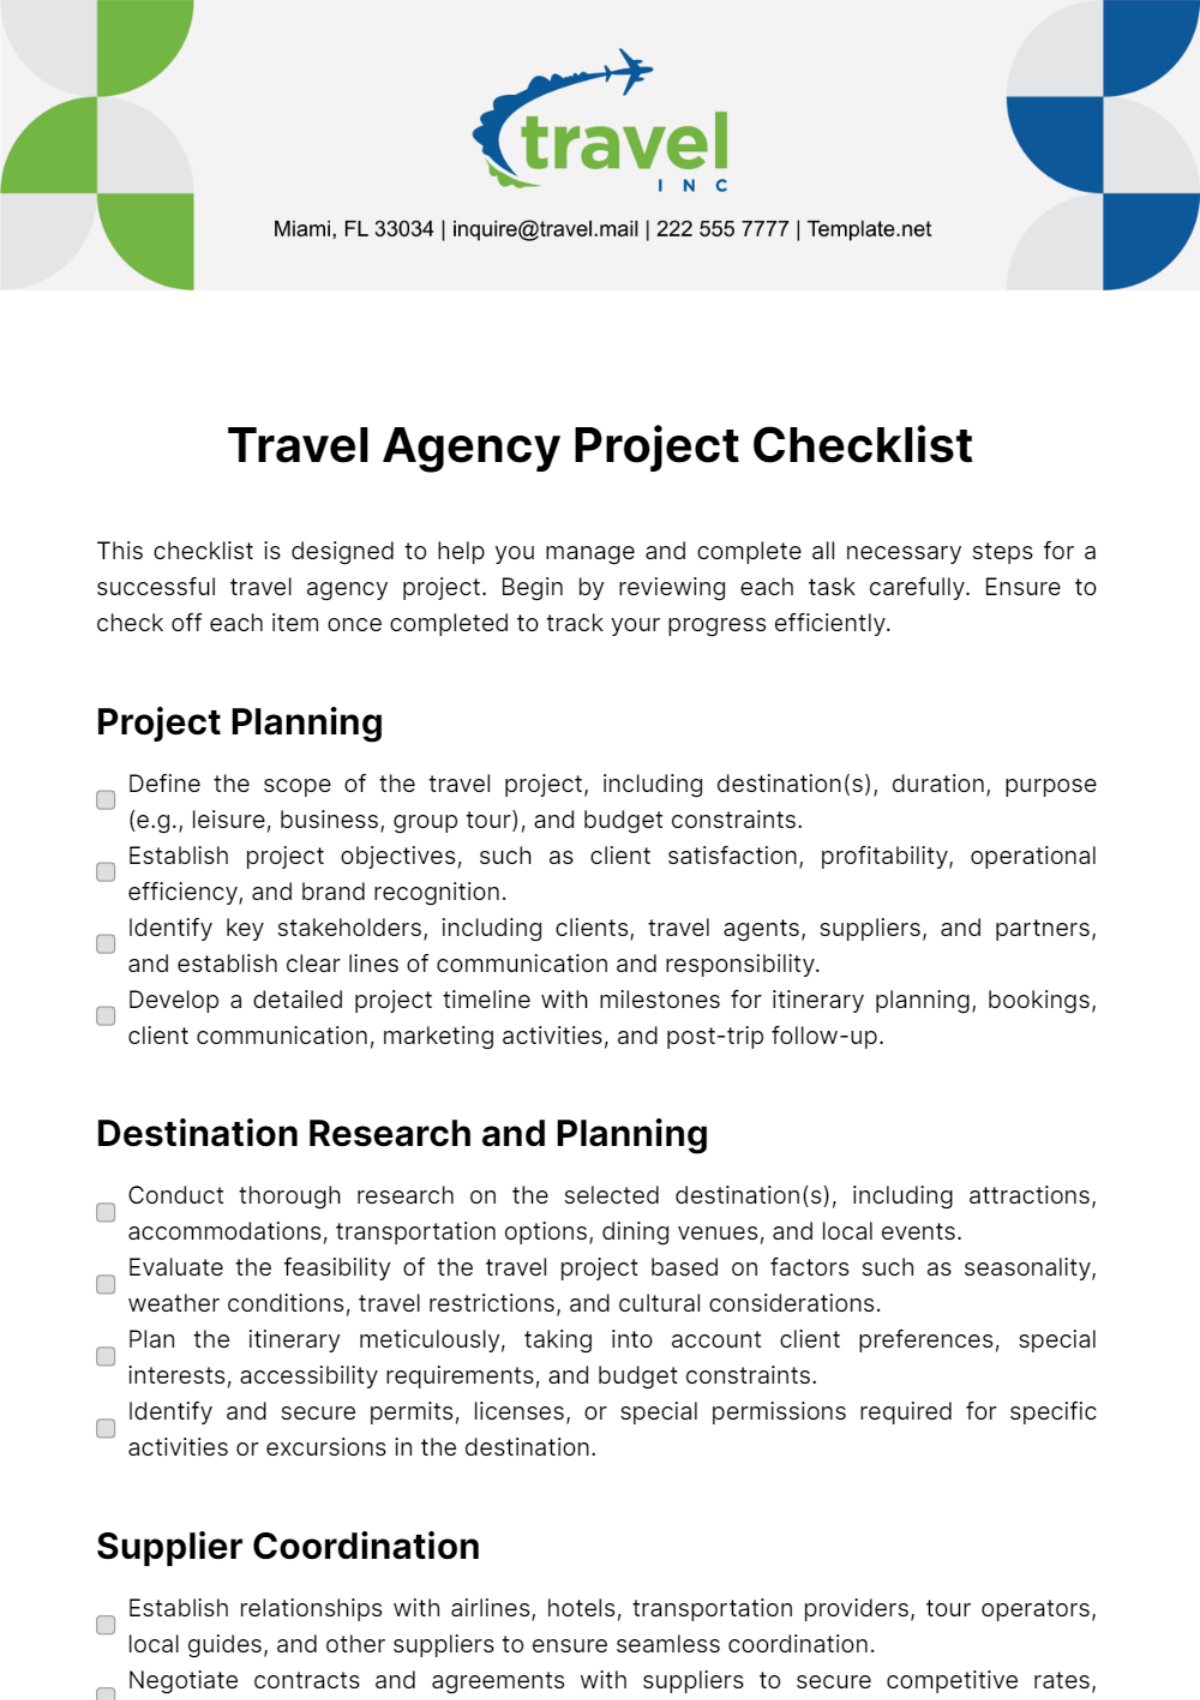 Travel Agency Project Checklist Template